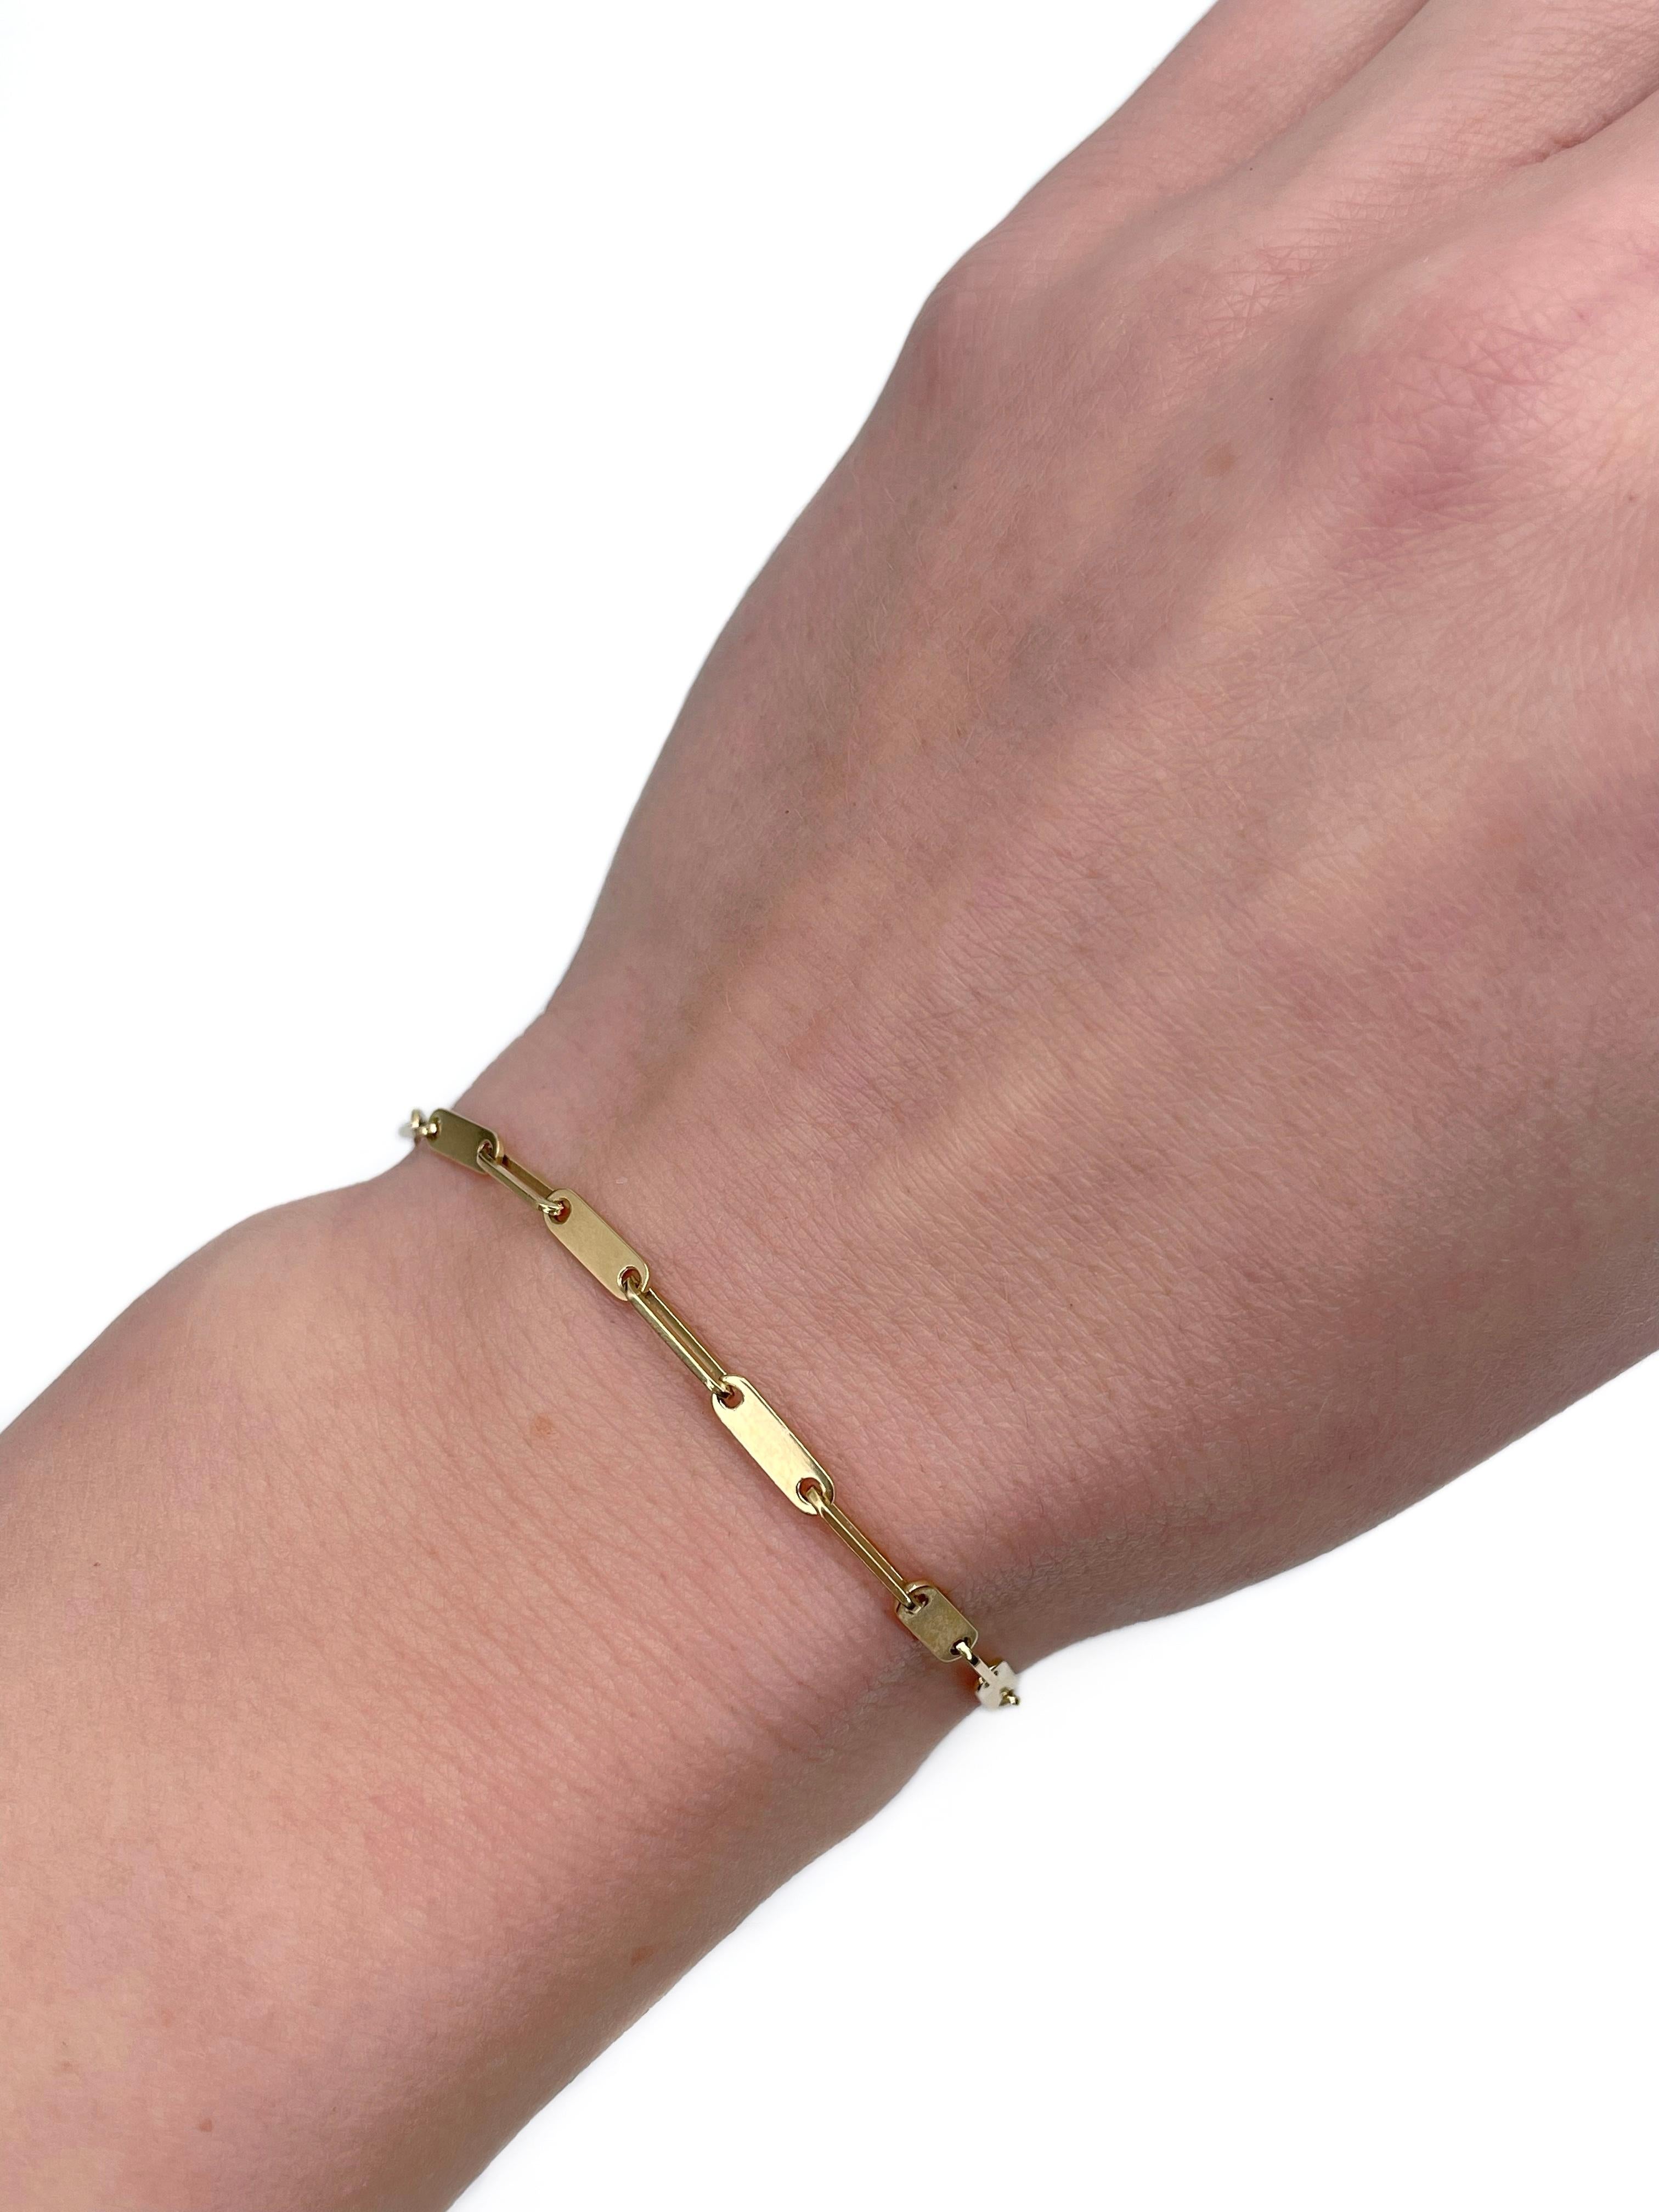 This is a stylish minimalistic R10 chain bracelet designed by Dinh Van. It is crafted in 18K yellow gold. Has an eagle hallmarks. 

Created in 1976, the Menottes clasp has become an iconic motif, a symbol of love and attachment. 

Bracelet comes